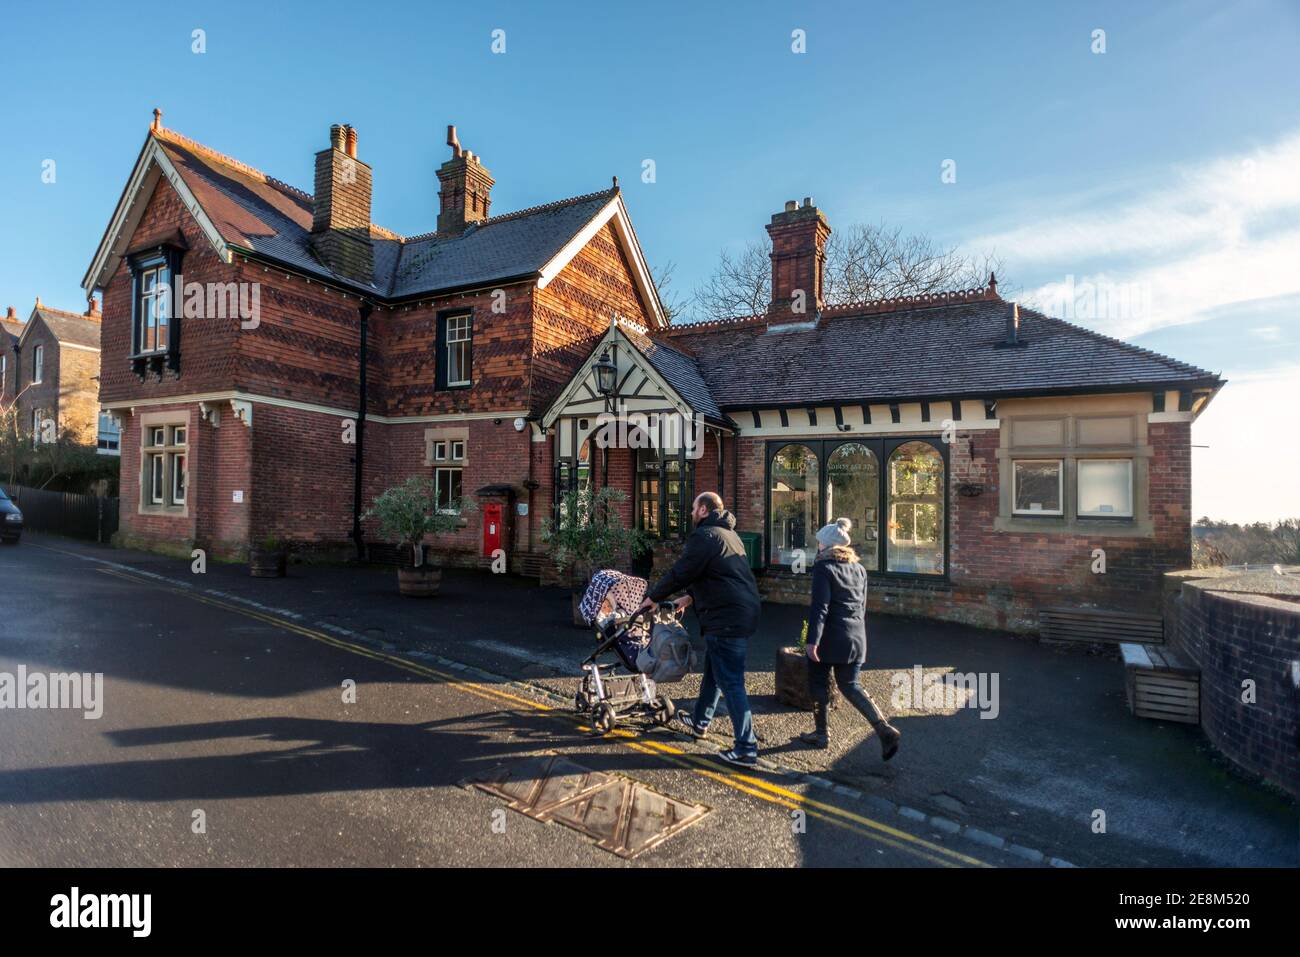 Heathfield, January 25th 2021: The former railway station, now a bistro, in the mid-Sussex market town of Heathfield Stock Photo